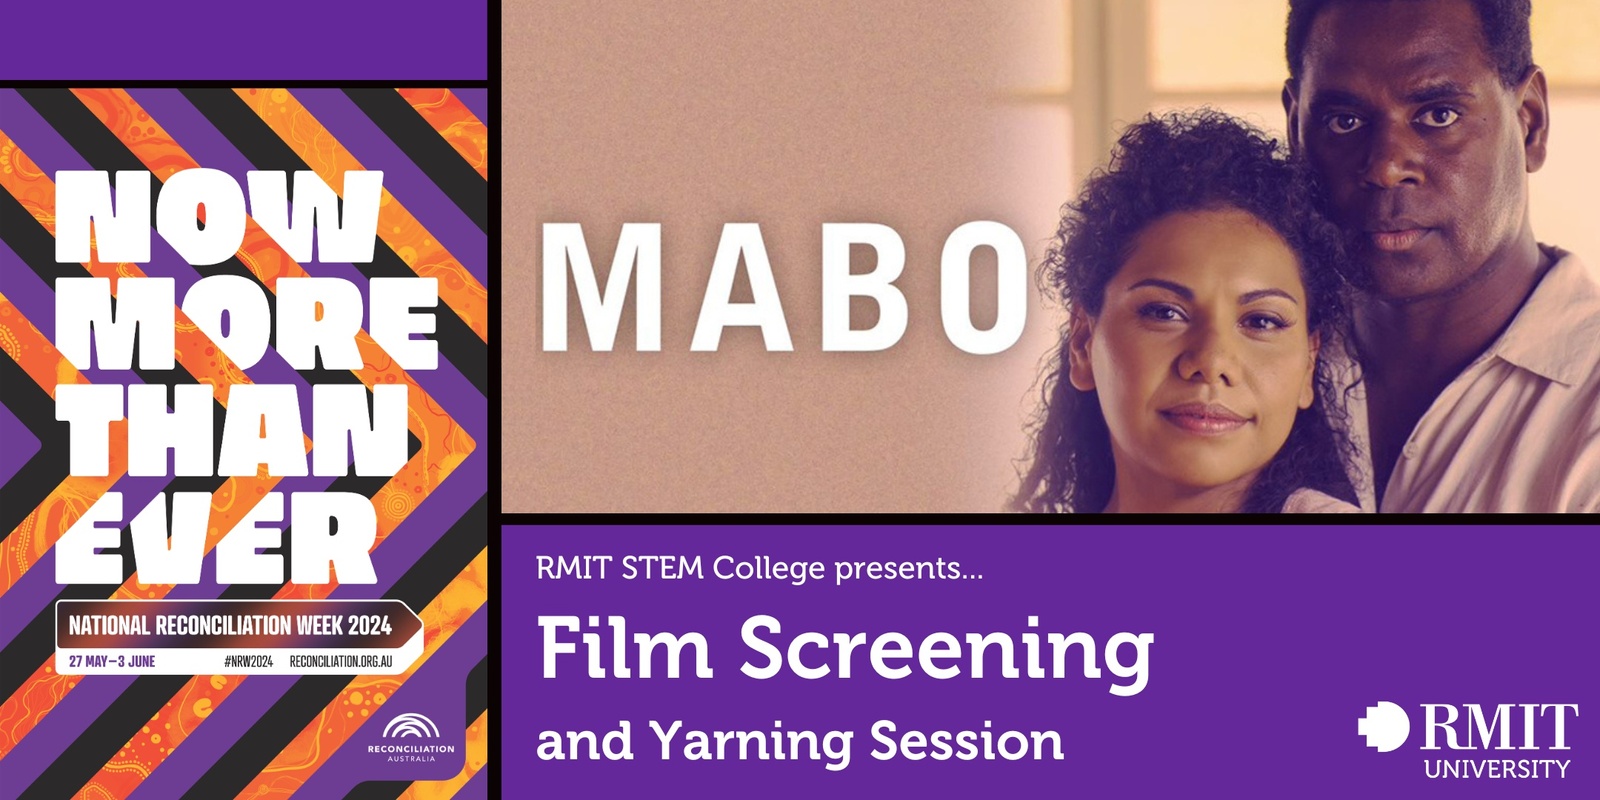 Banner image for NRW 2024: Mabo - A STEM College Film Screening and Yarning Session